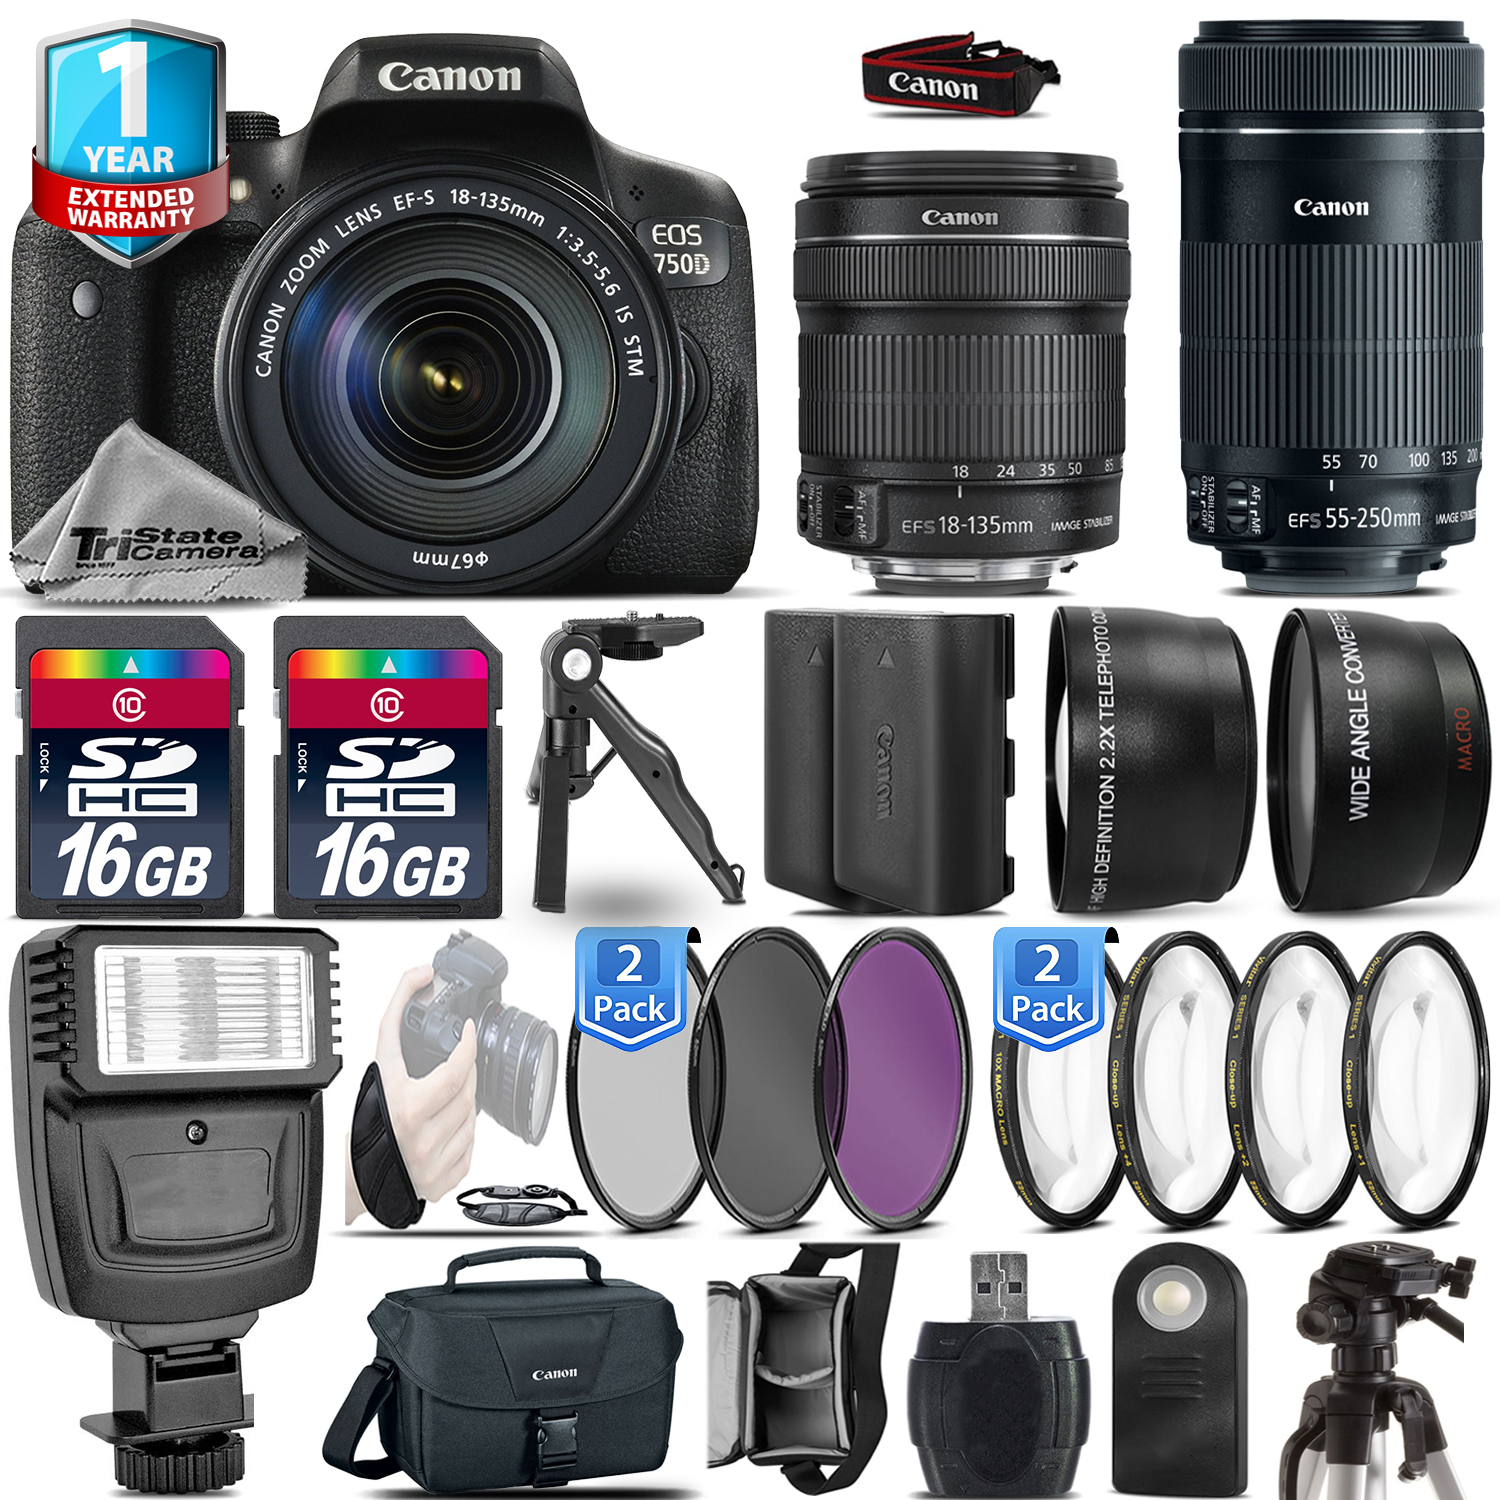 EOS Rebel 750D Camera + 18-135mm IS + 55-200mm IS + EXT BAT +1yr Warranty *FREE SHIPPING*